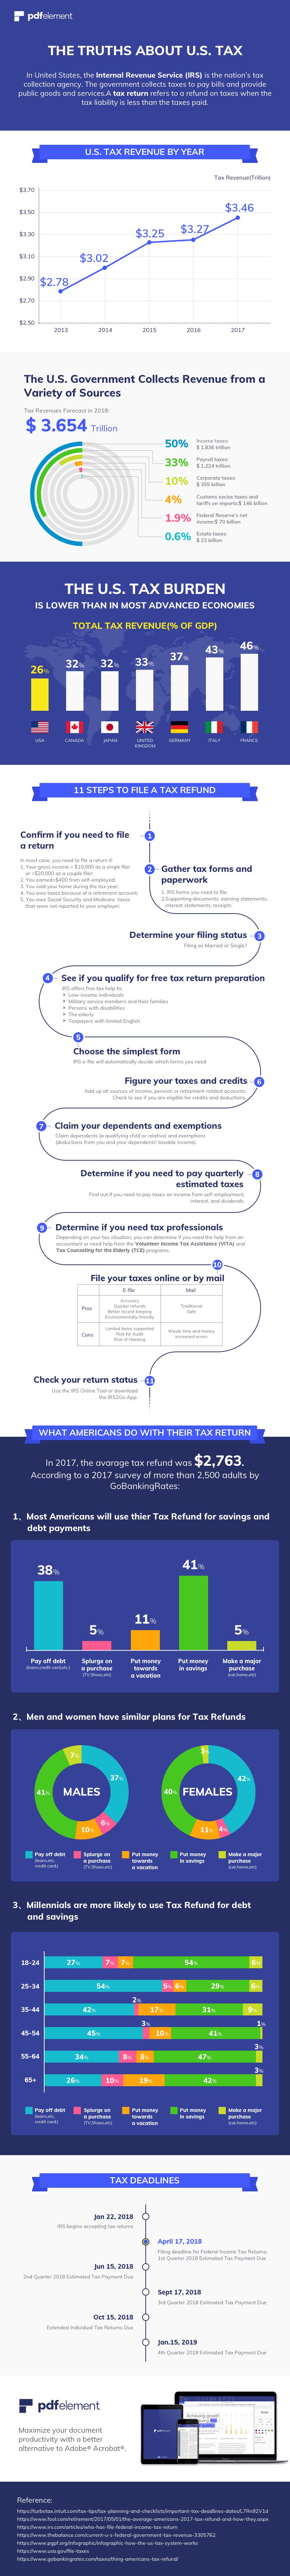 Facts about Tax Refund in U.S. in 2018